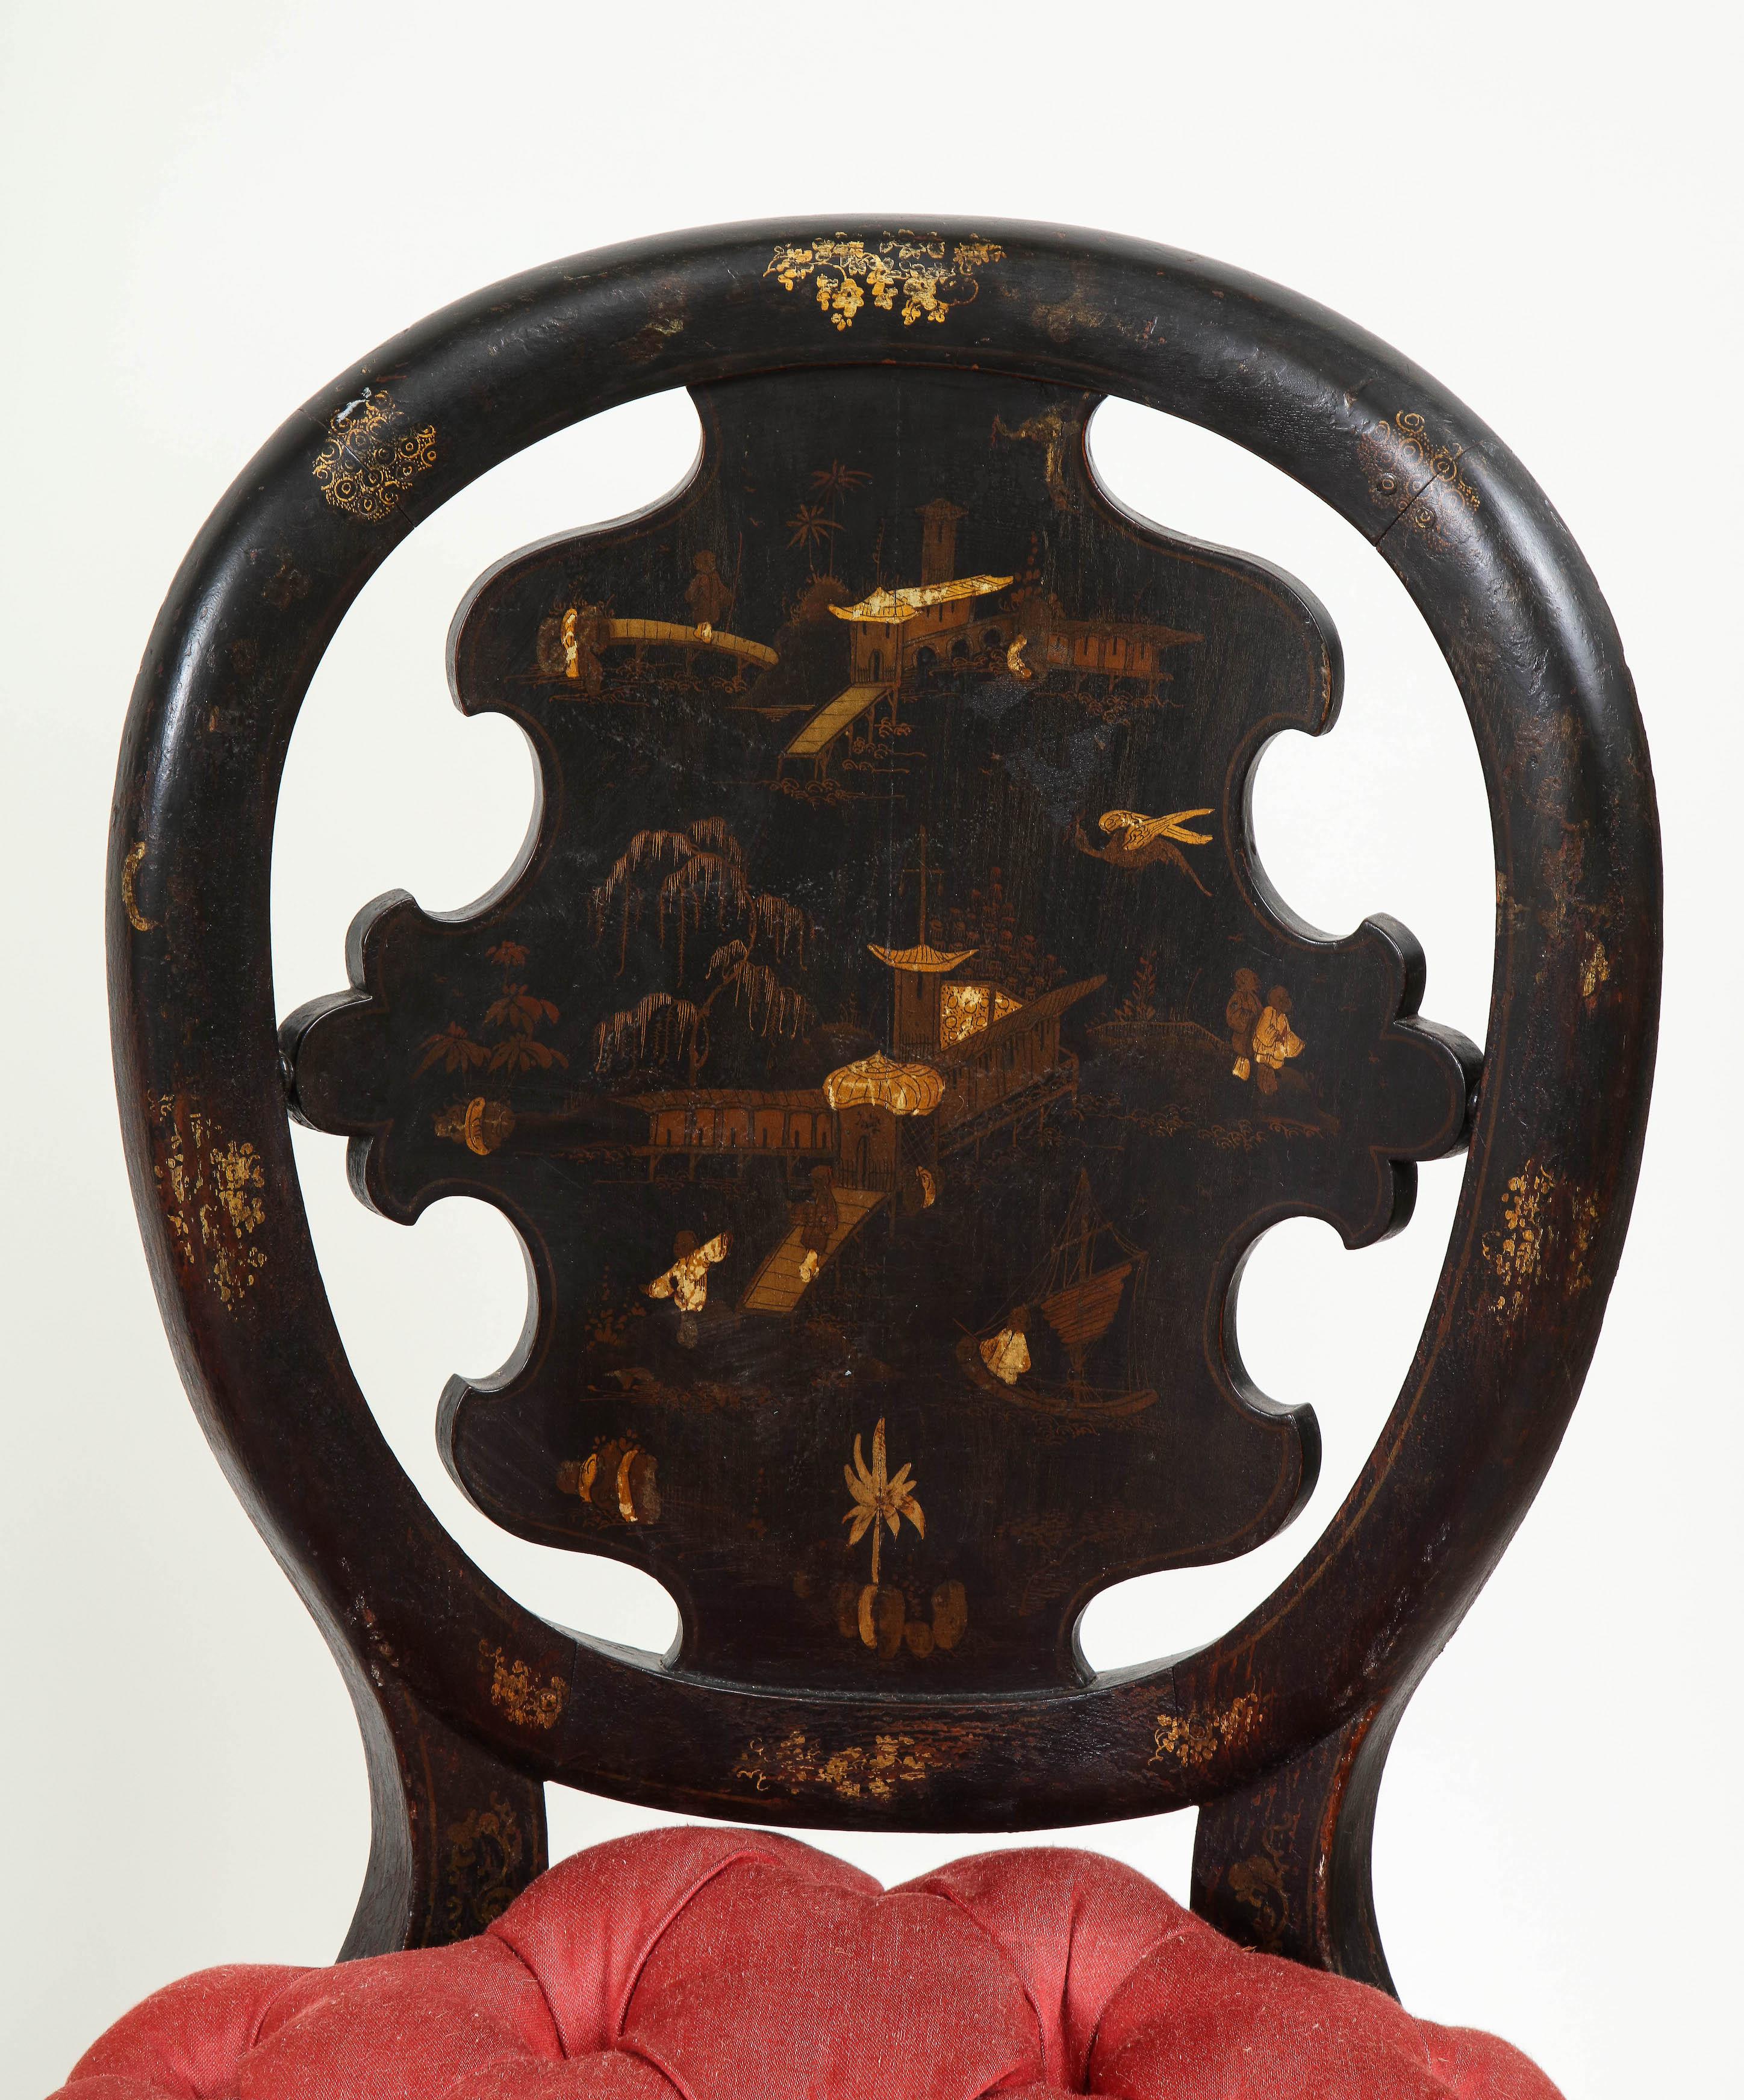 Each with rounded back centered by a shaped backsplash decorated with chinoiserie decoration of temples and pagodas in a riverscape setting; the tufted seat over a seat rail and round tapering legs decorated with foliate scrollwork.